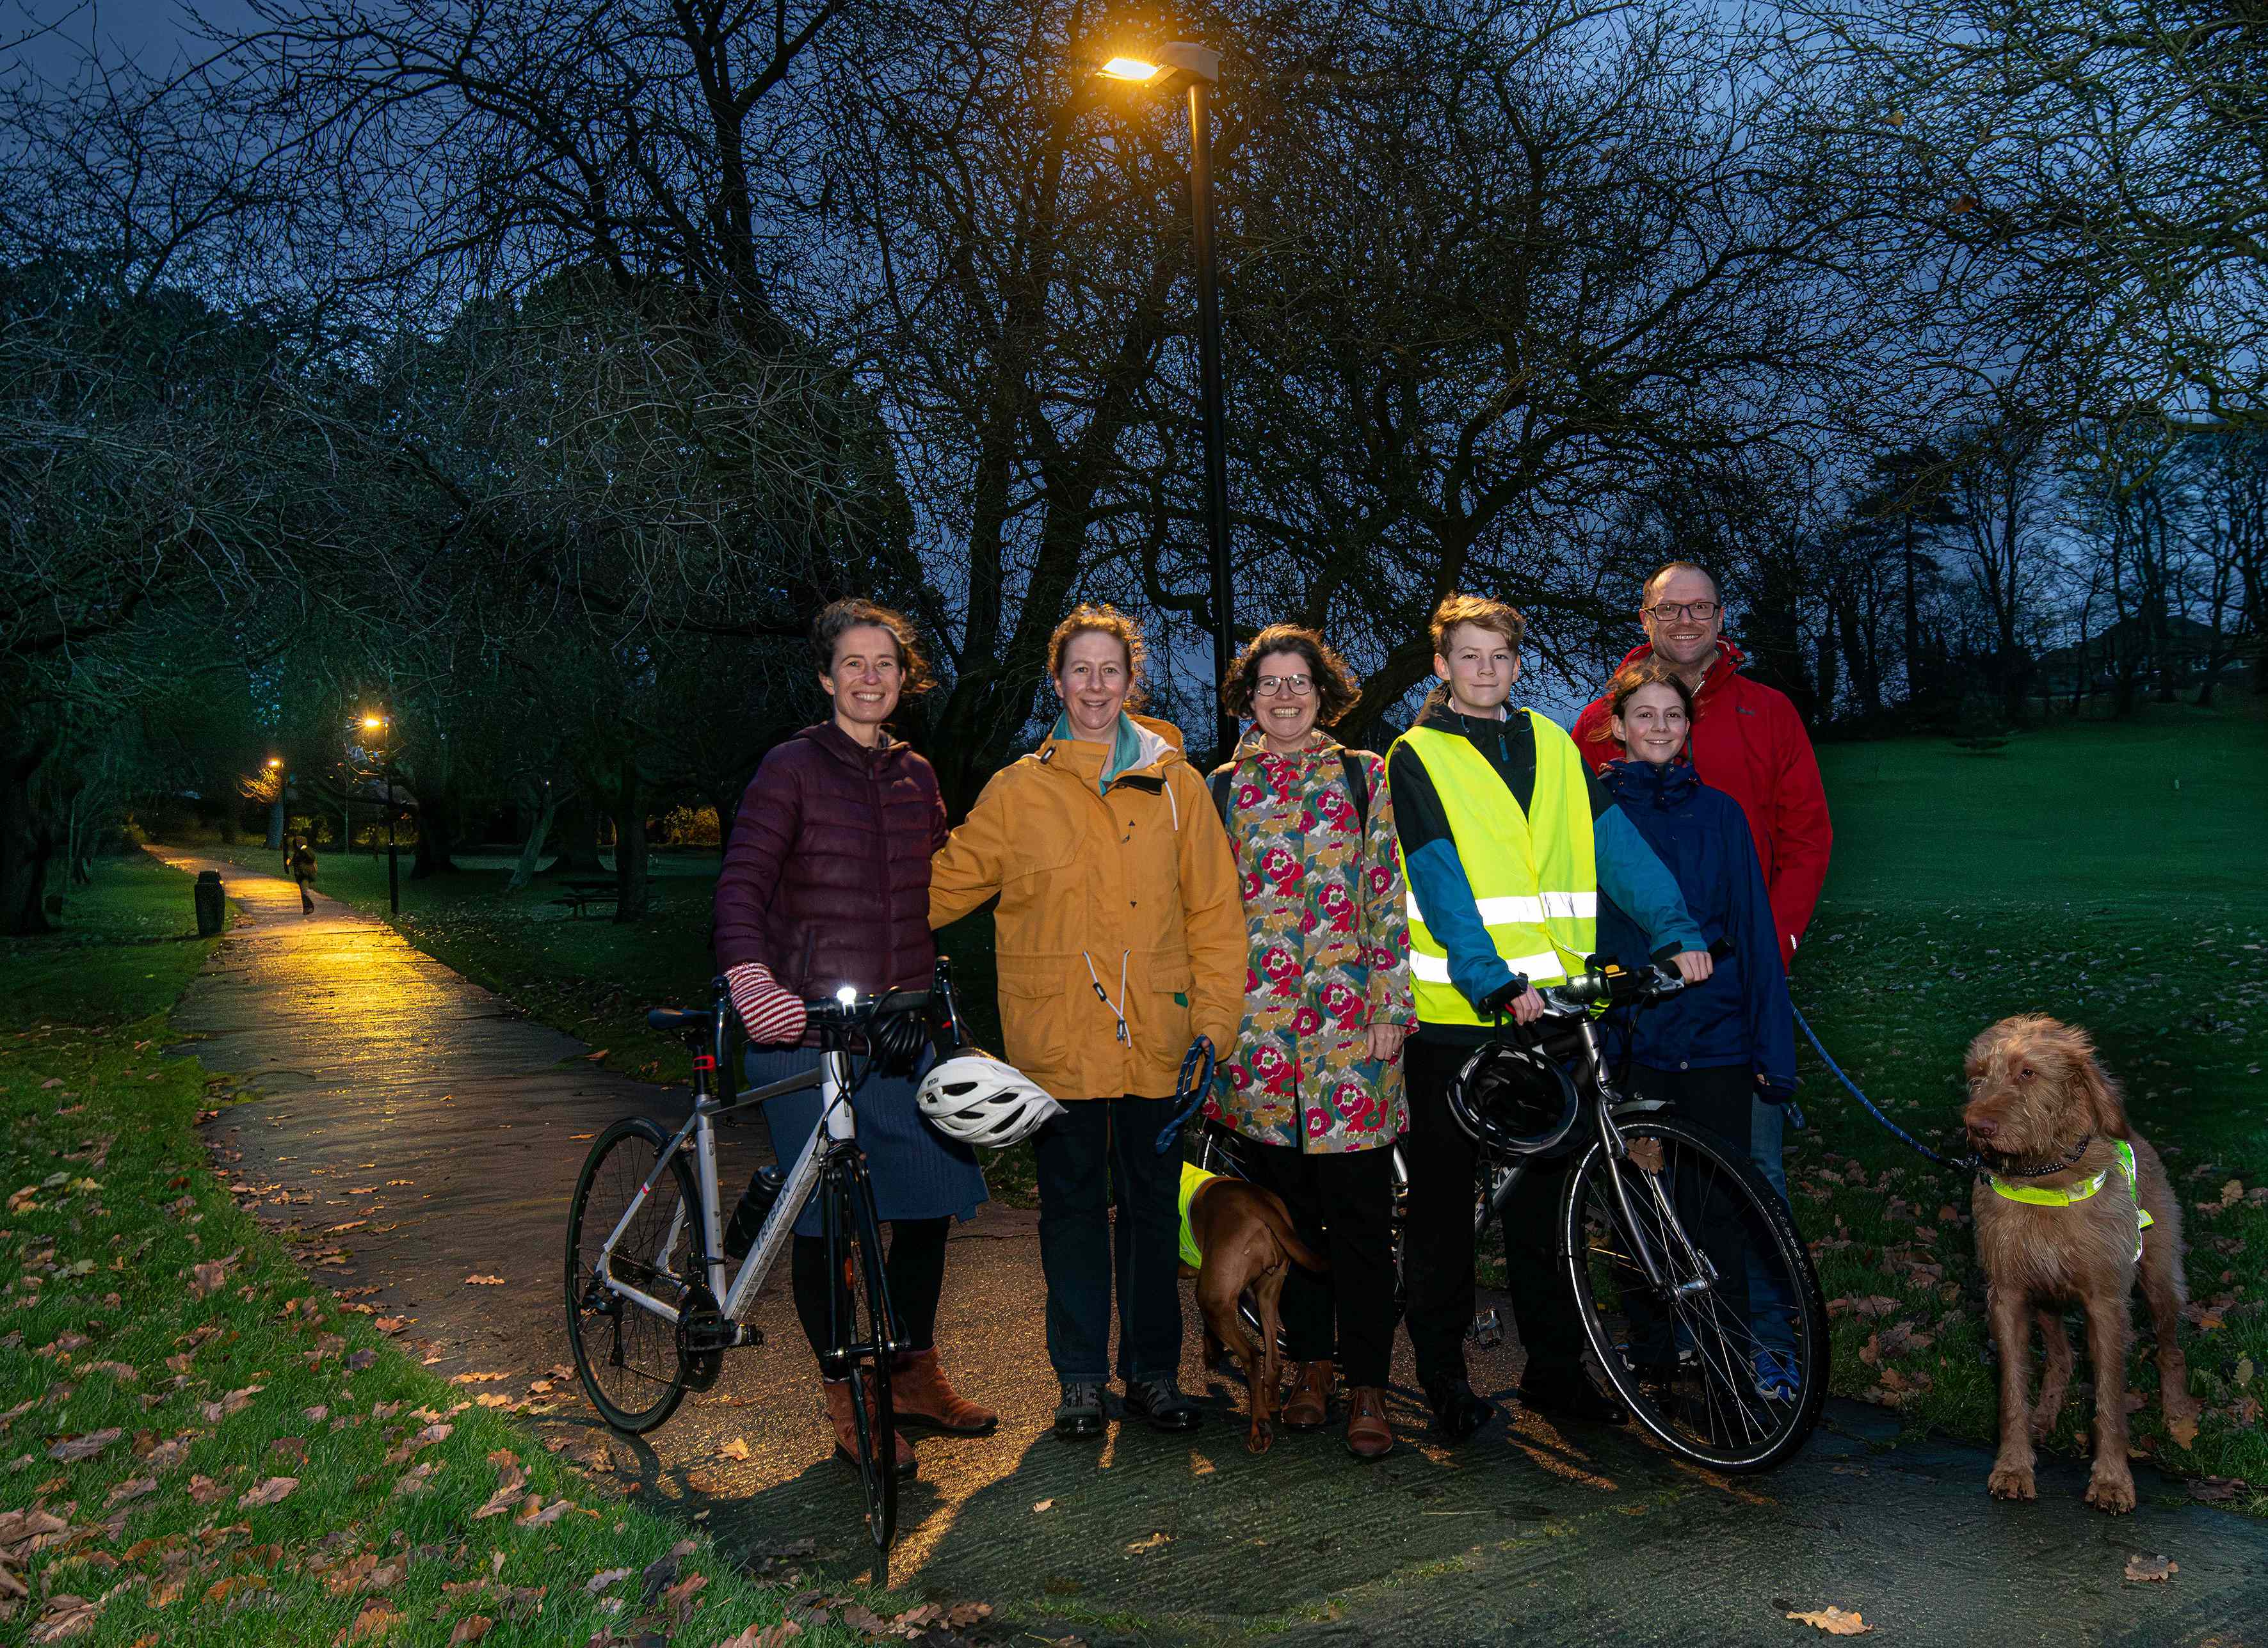 (From left to right) Katie Birks, Elaine Hiser, Fiona Protheroe, Will Hiser-Dobson, Isla Hiser Dobson and Richard Dobson in Skipton’s Aireville Park, where new lighting has been introduced. 